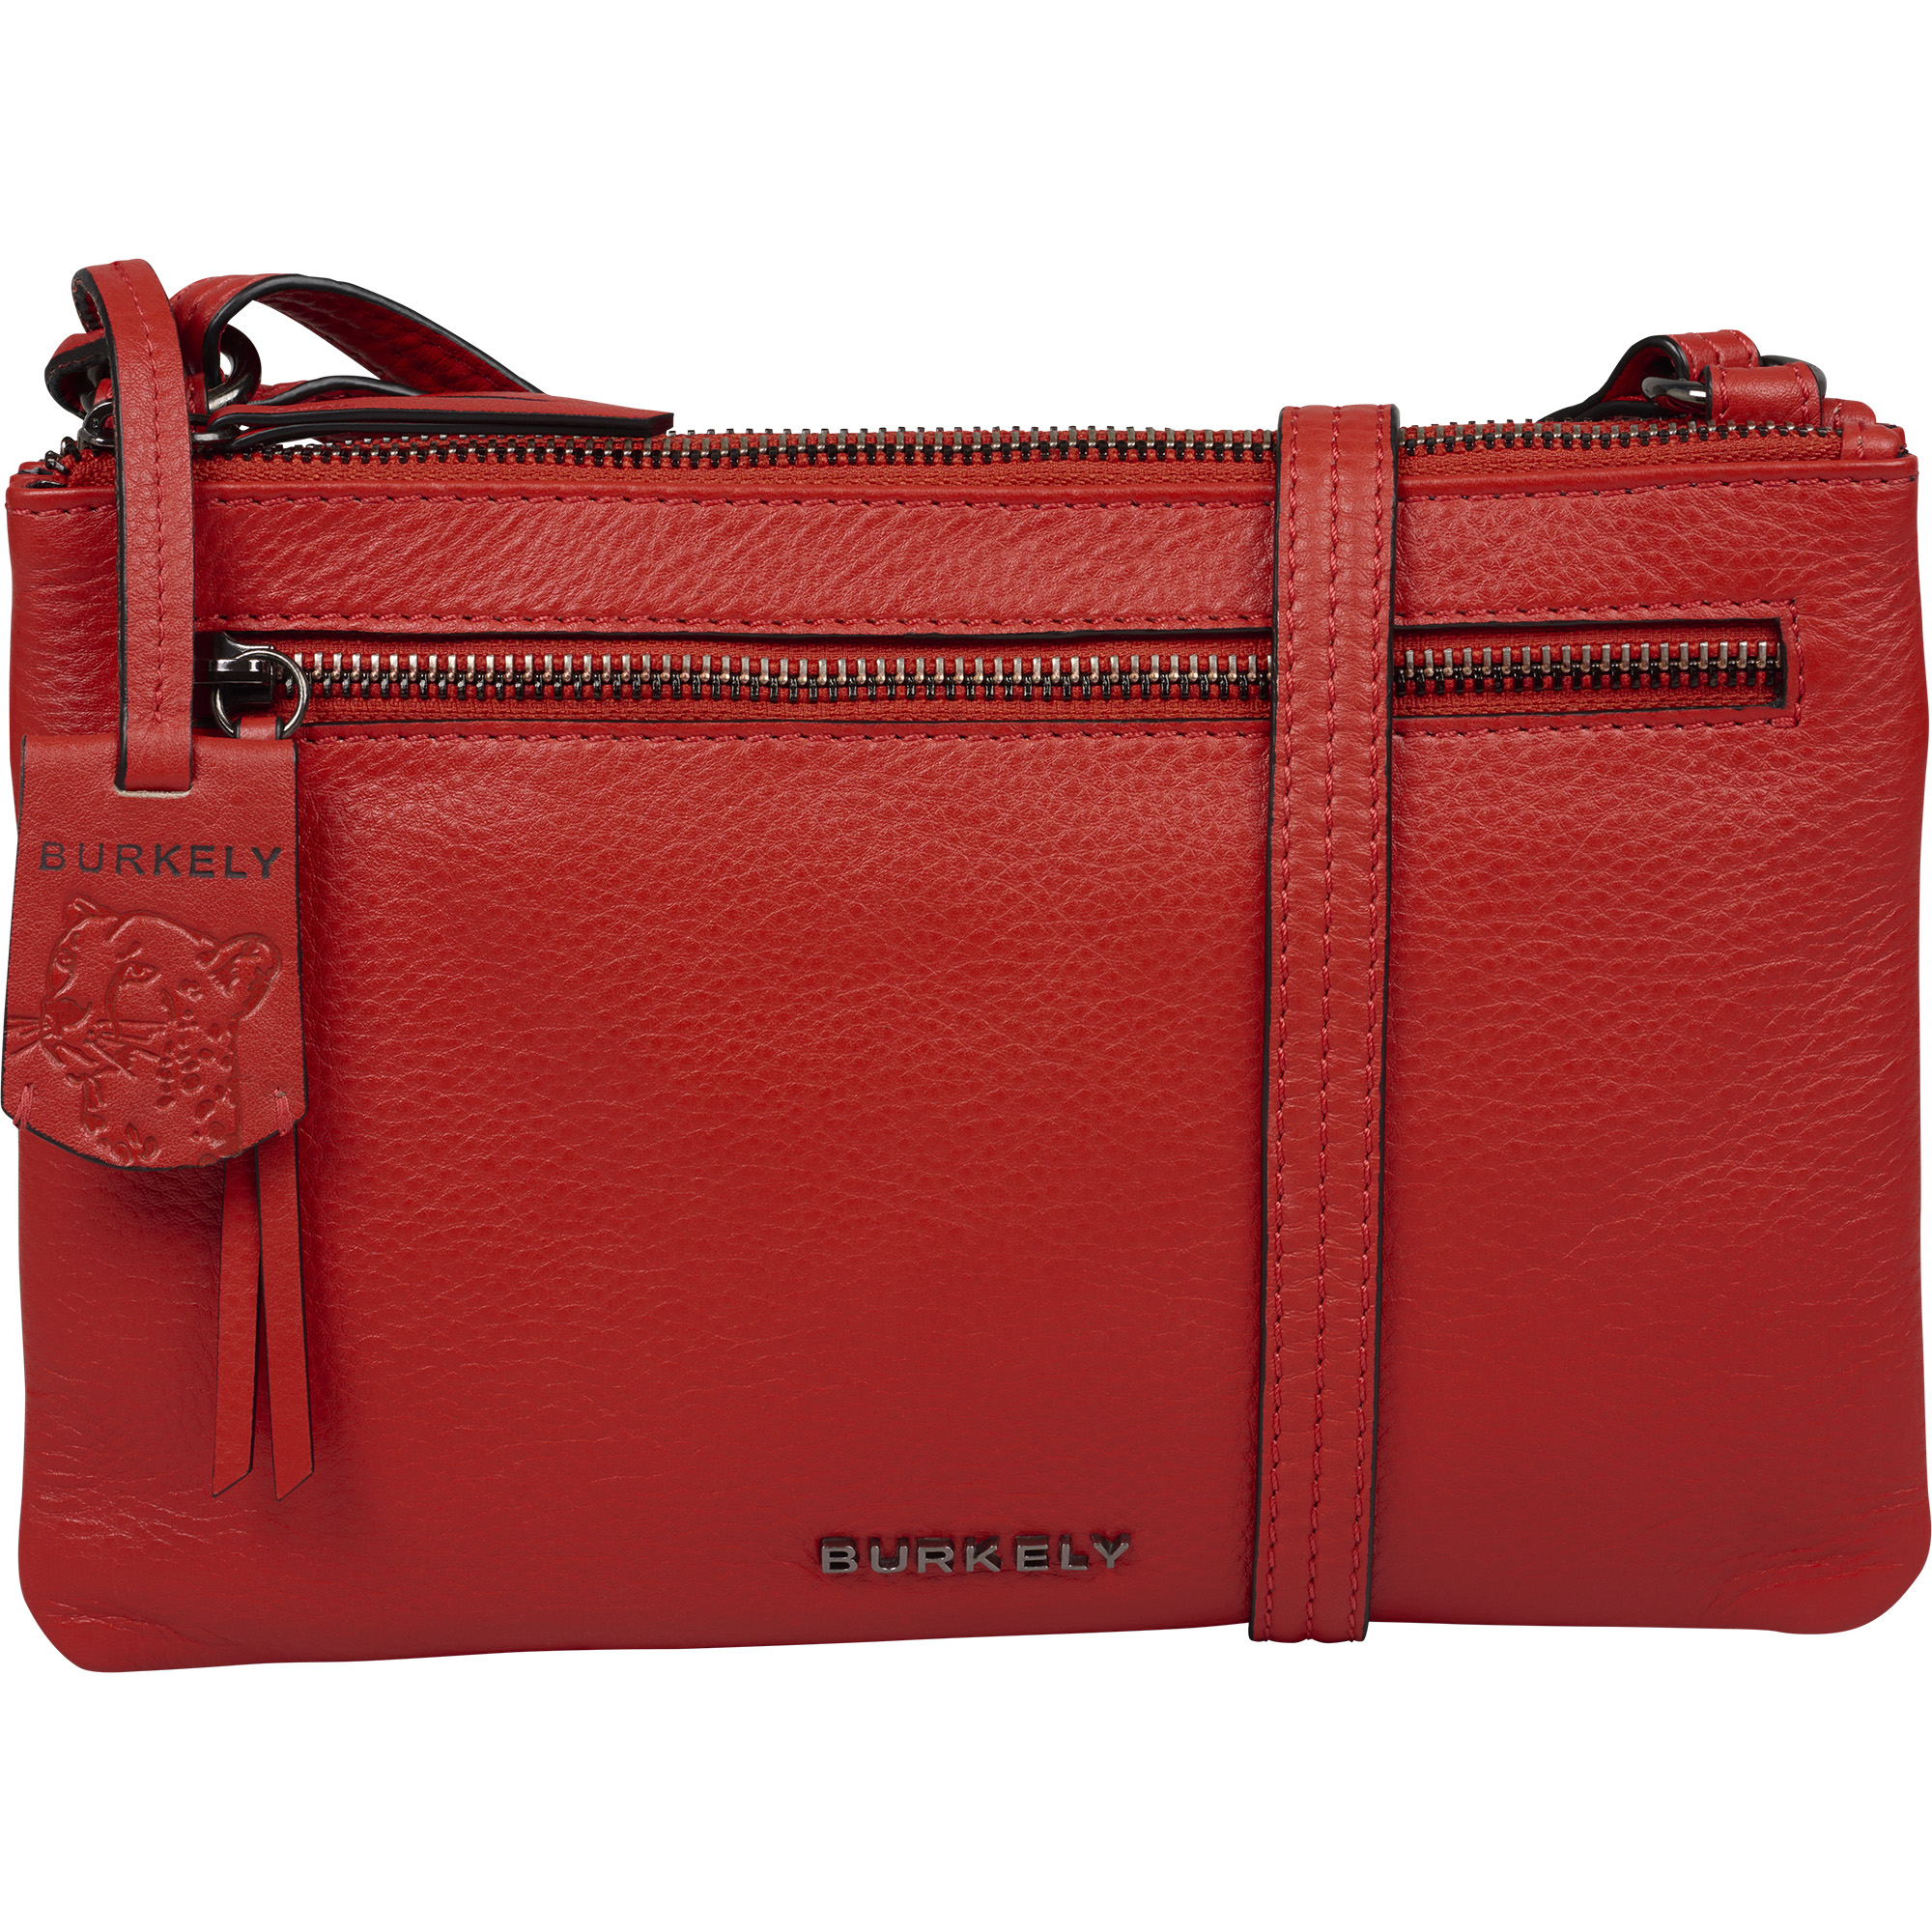 Burkely 1000716 Double Pocket Bag 64.55 Red